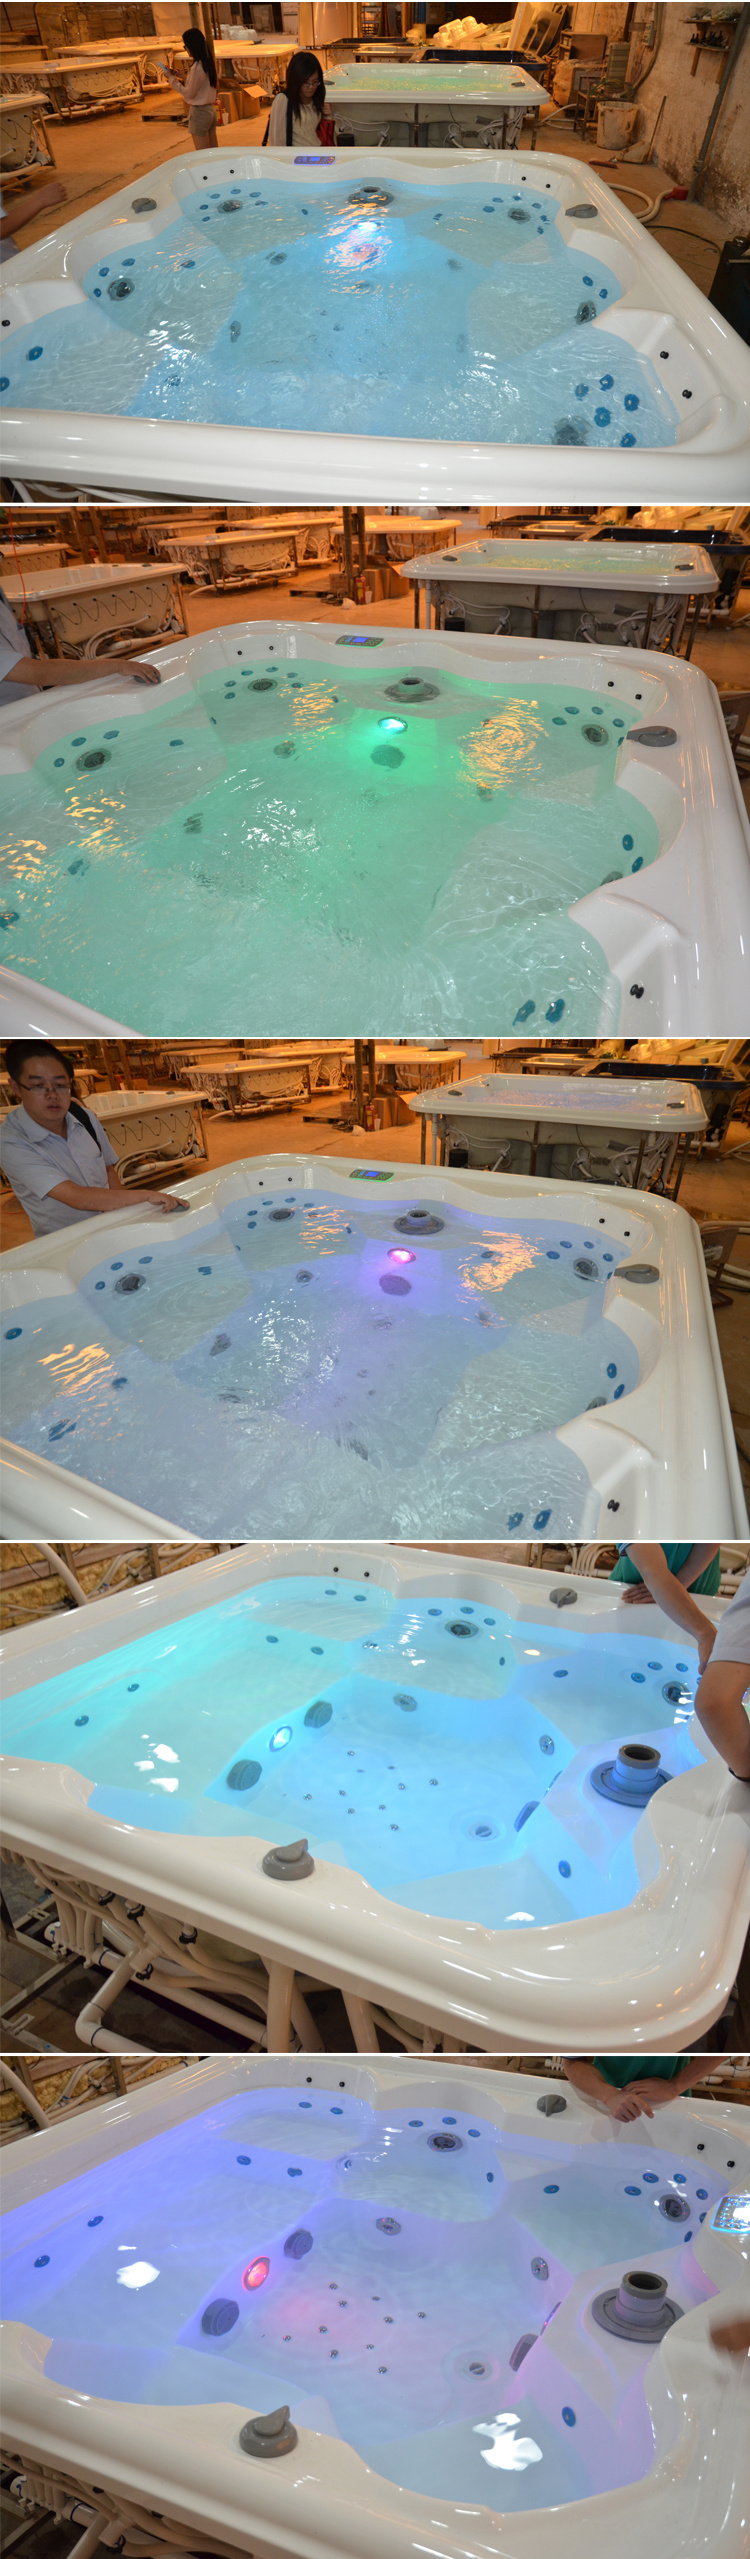 Hot Sale Indoor Outdoor 6 Person Acrylic Whirlpool Hot Tub